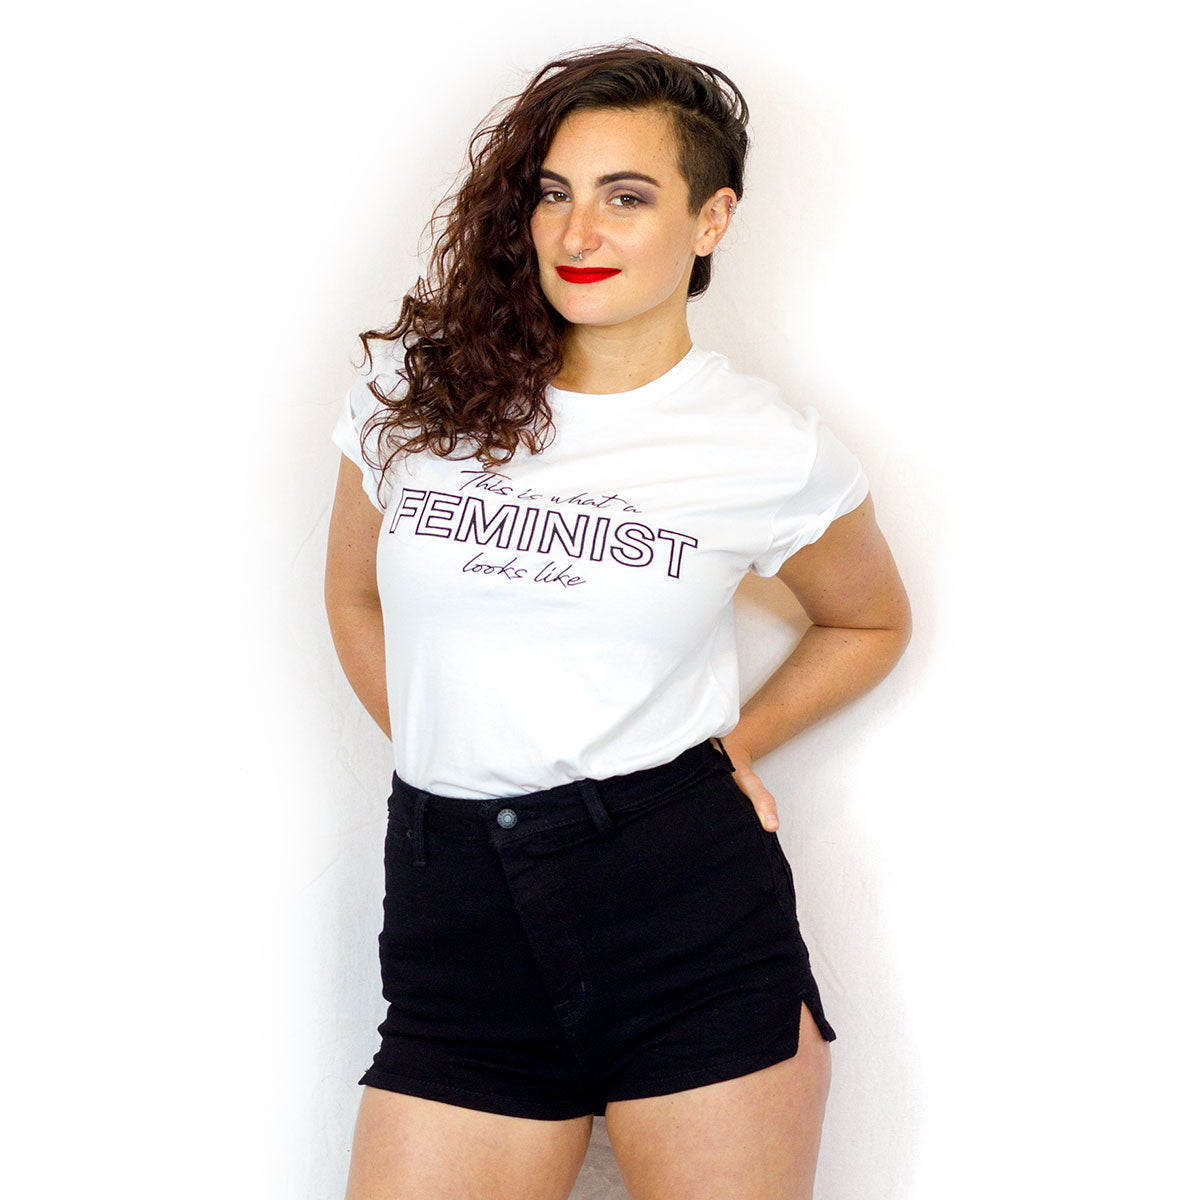 This Is What A Feminist Looks Like Unisex Embroidered T-shirt, Shirts, HEED THE HUM